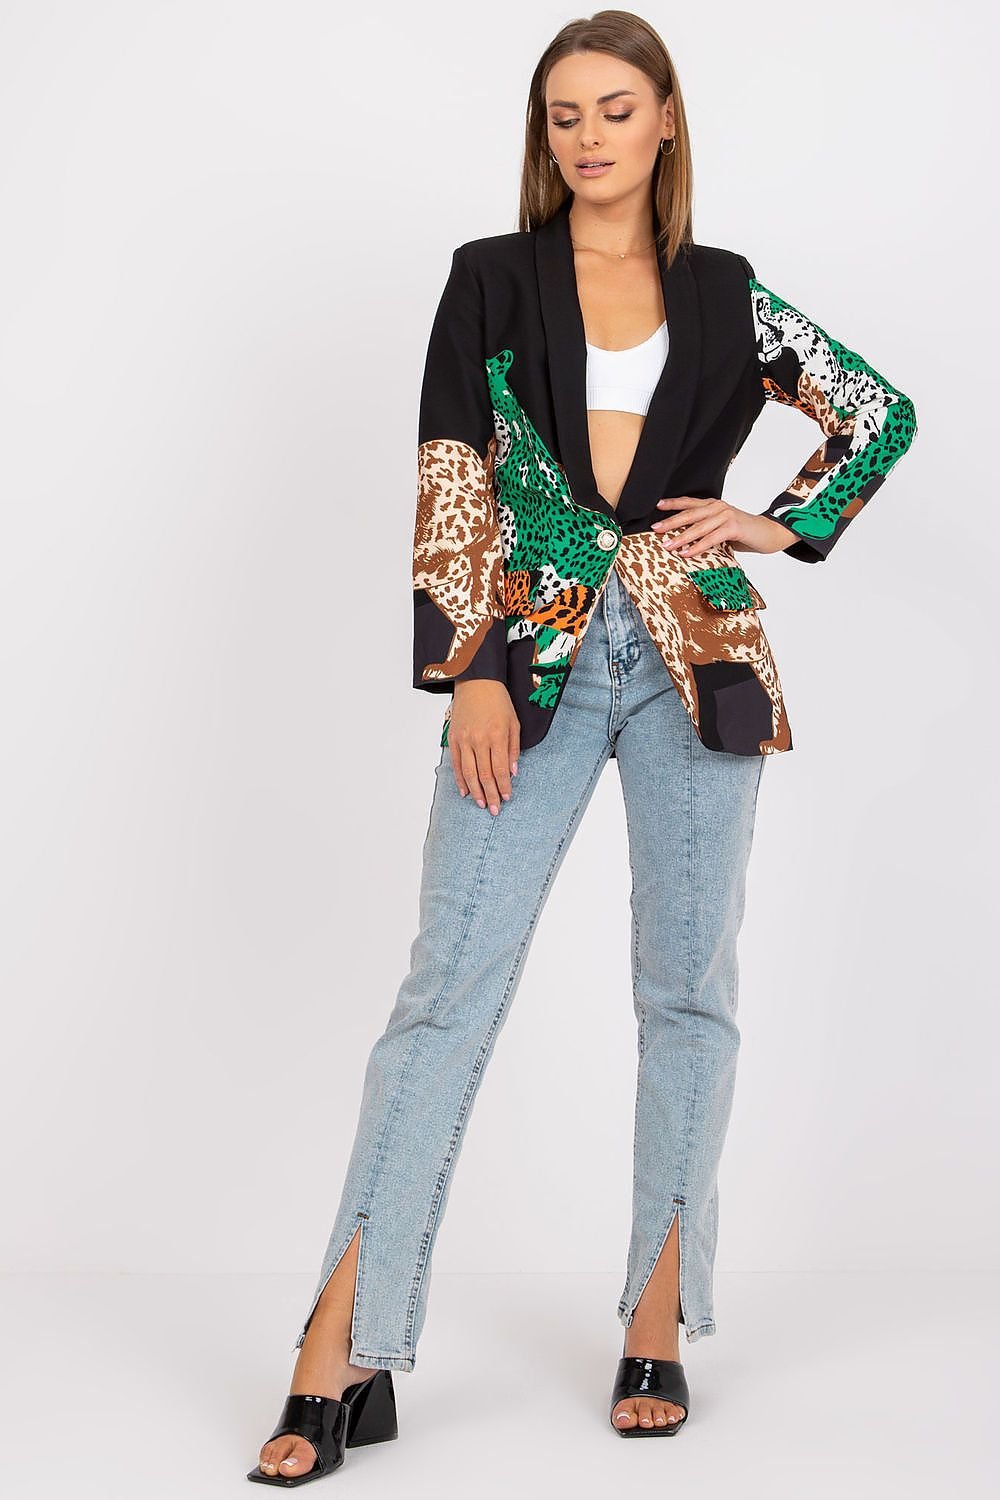 Animal Print Sunny Day Button-Up Jacket